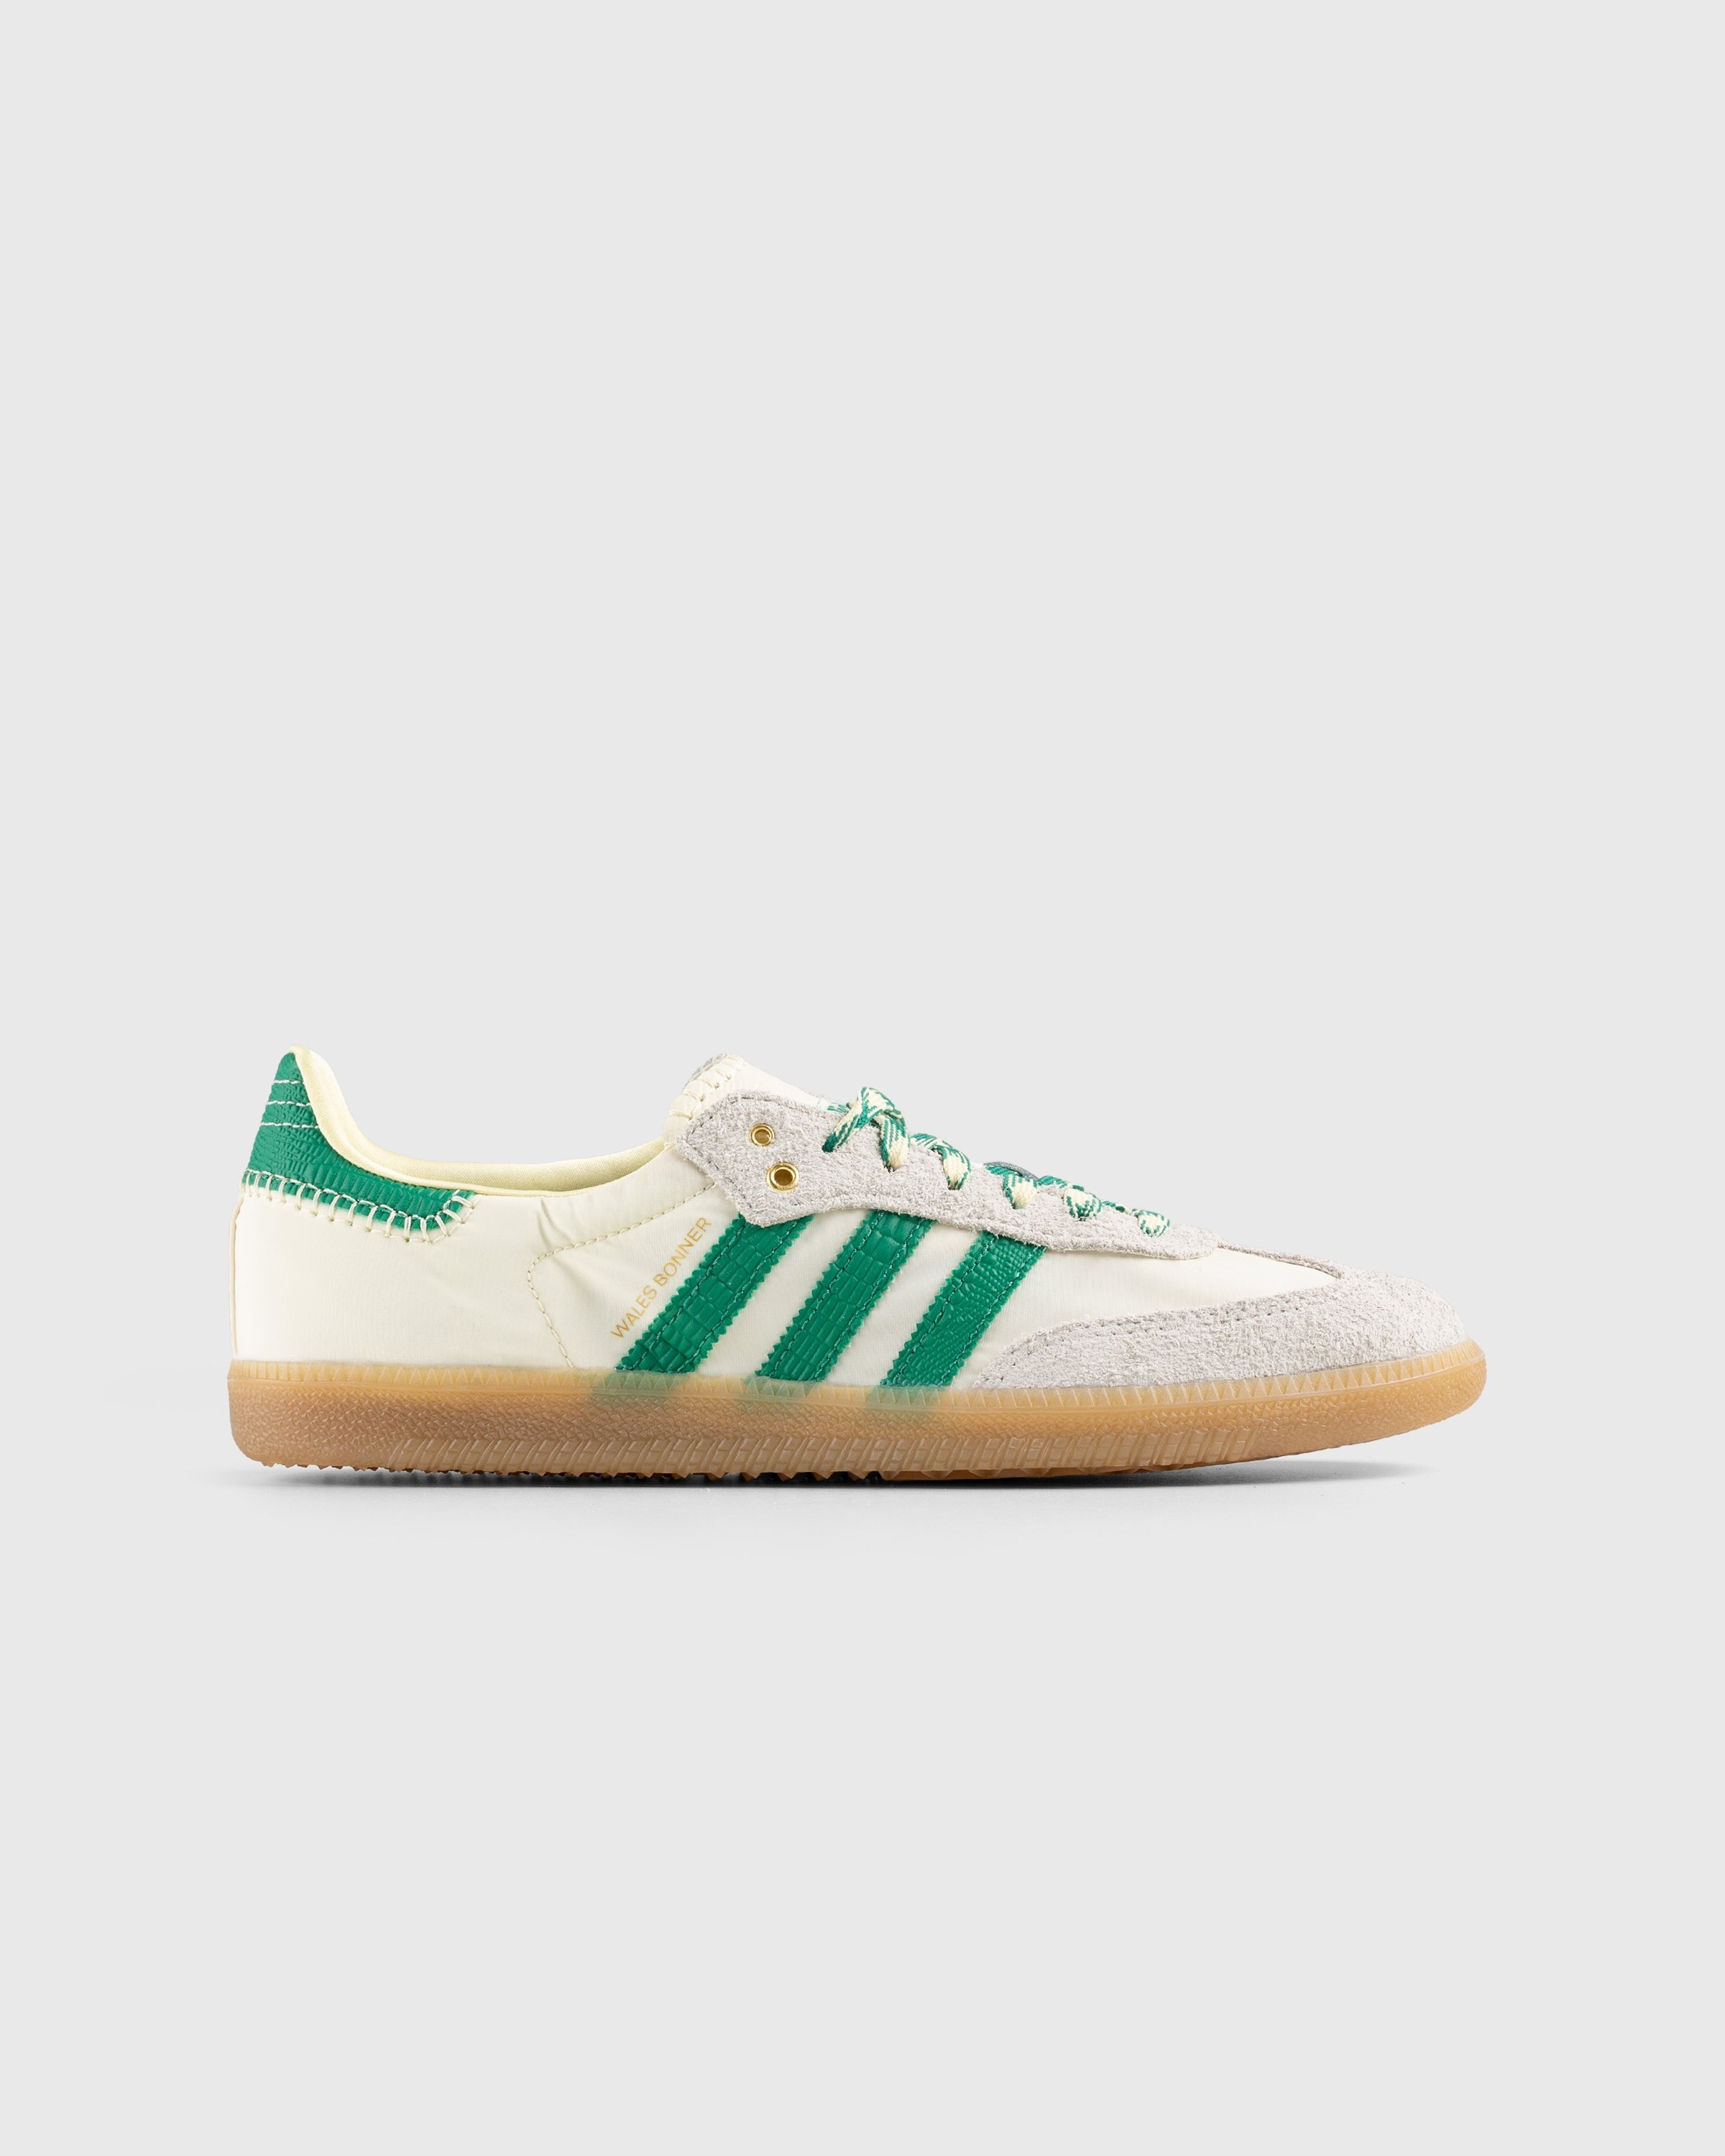 Adidas x Wales Bonner – WB Samba Cream White/Bold Green/Easy Yellow - Low Top Sneakers - Beige - Image 1